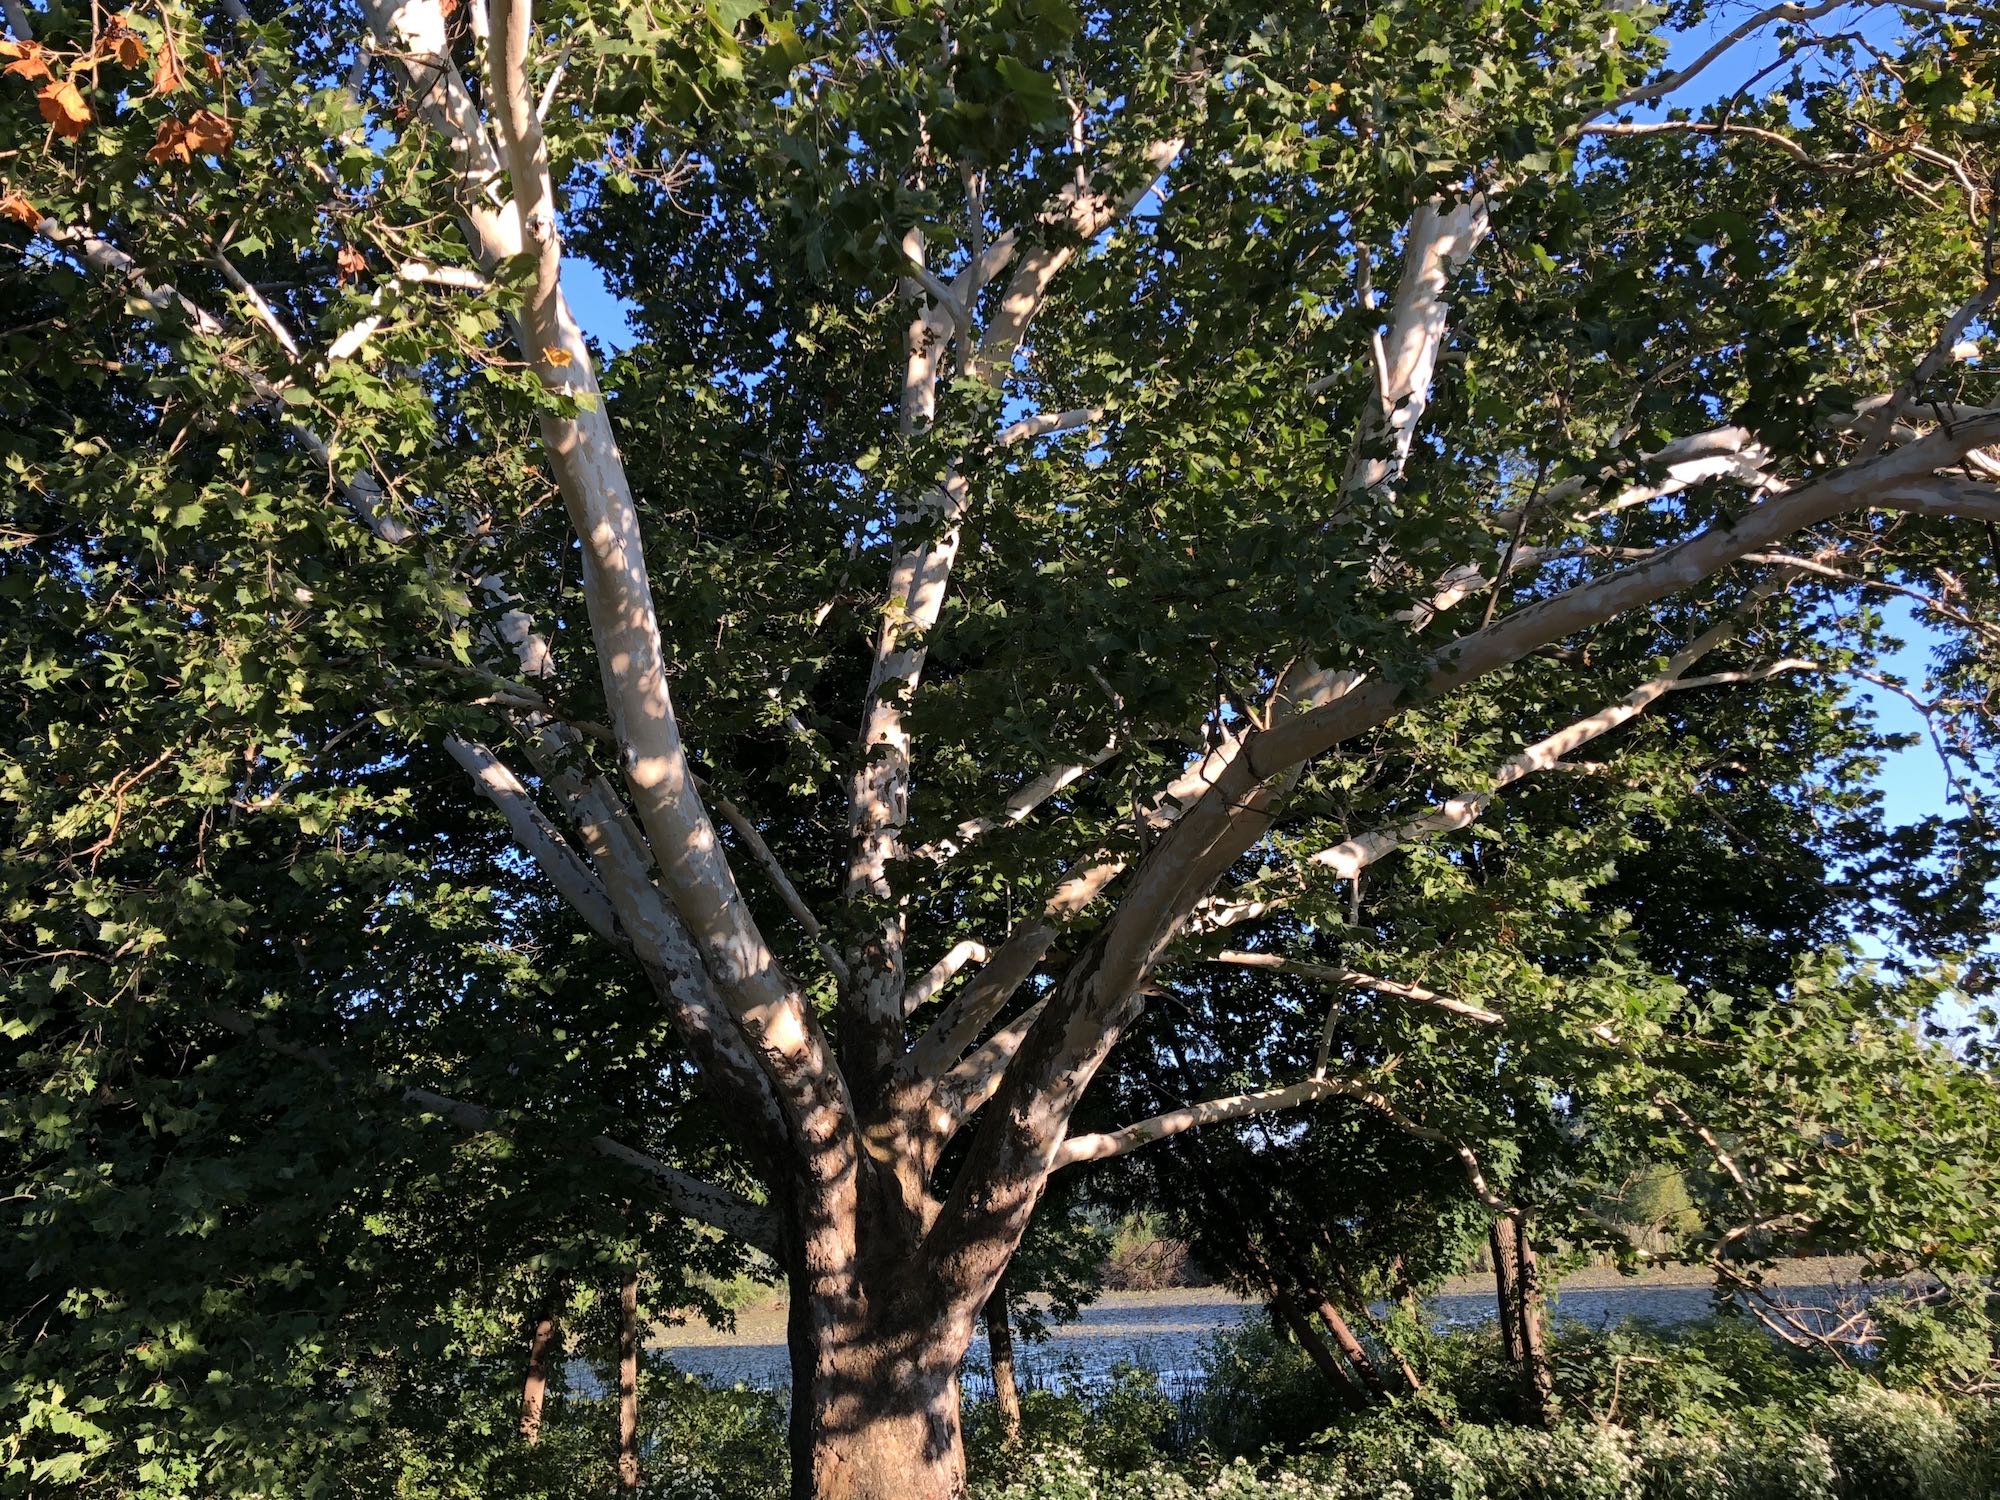 Sycamore tree between Ho-Nee-Um Pond and Arbor Drive on north shore of Lake Wingra on September 12, 2018.